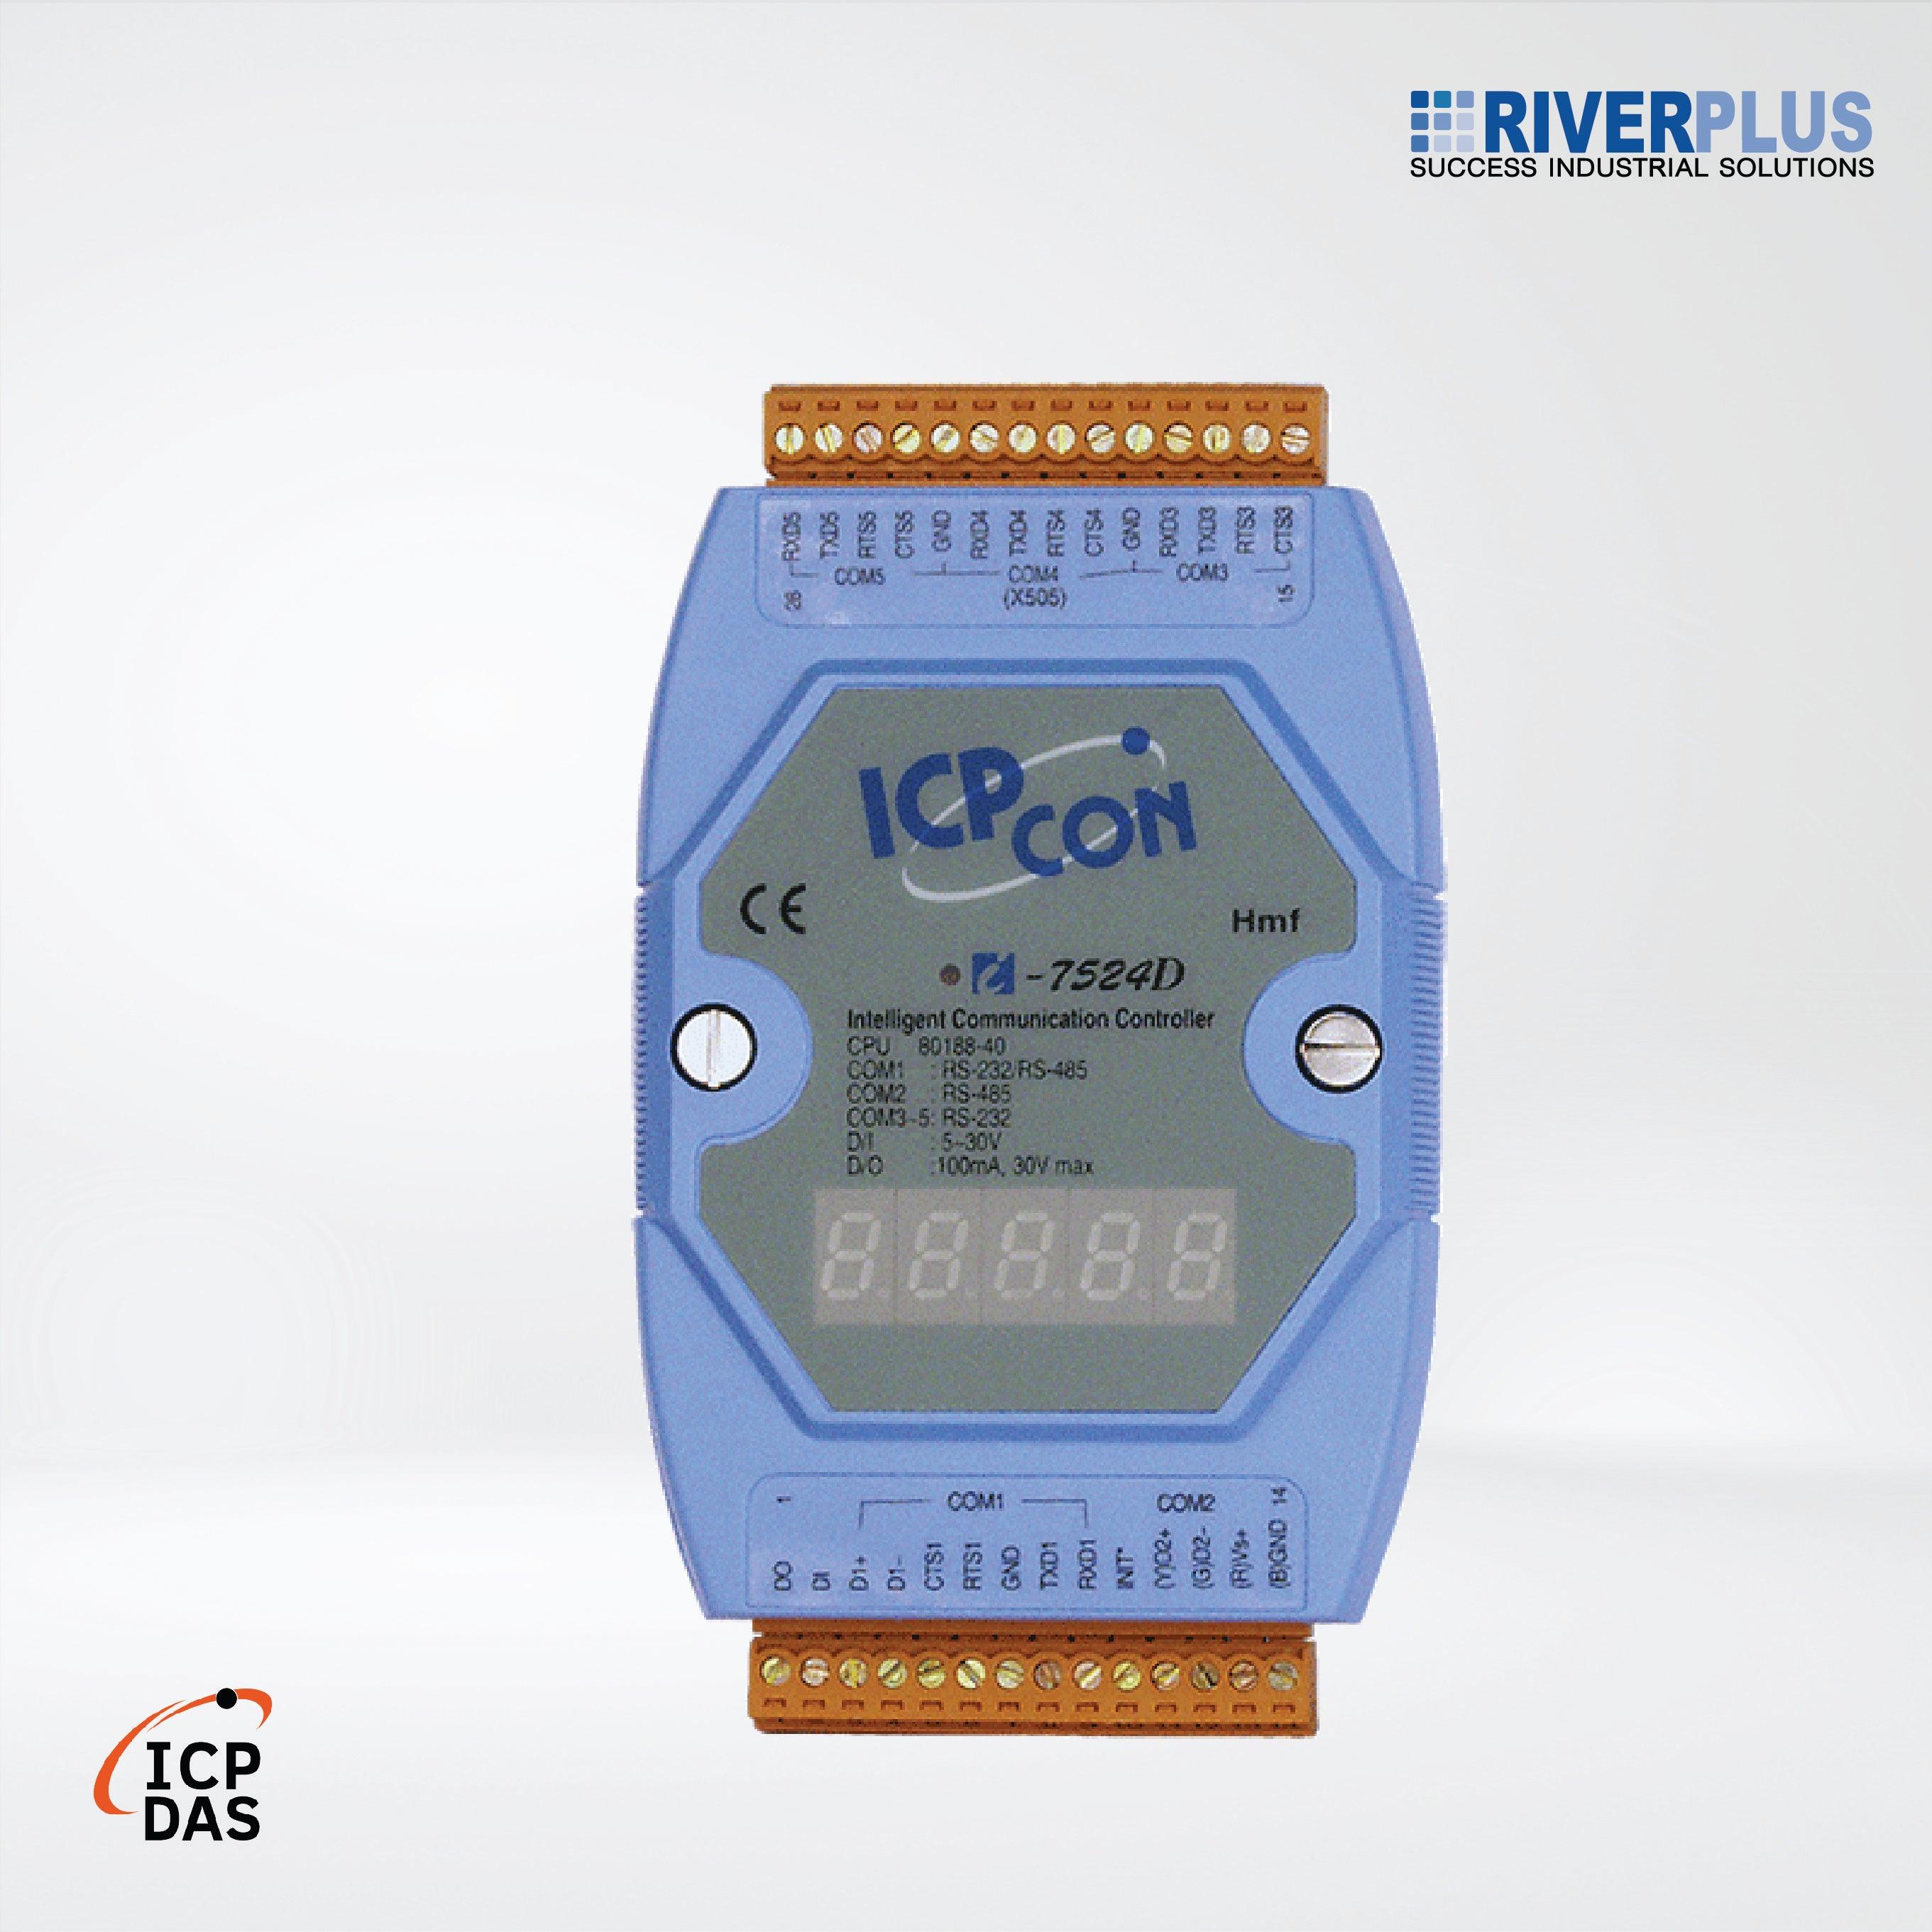 I-7524D Addressable RS-485 to 4 x RS-232/RS-485 Converter with 1 DI, 1 DO and 7-Segment LED Display (Blue Cover) - Riverplus